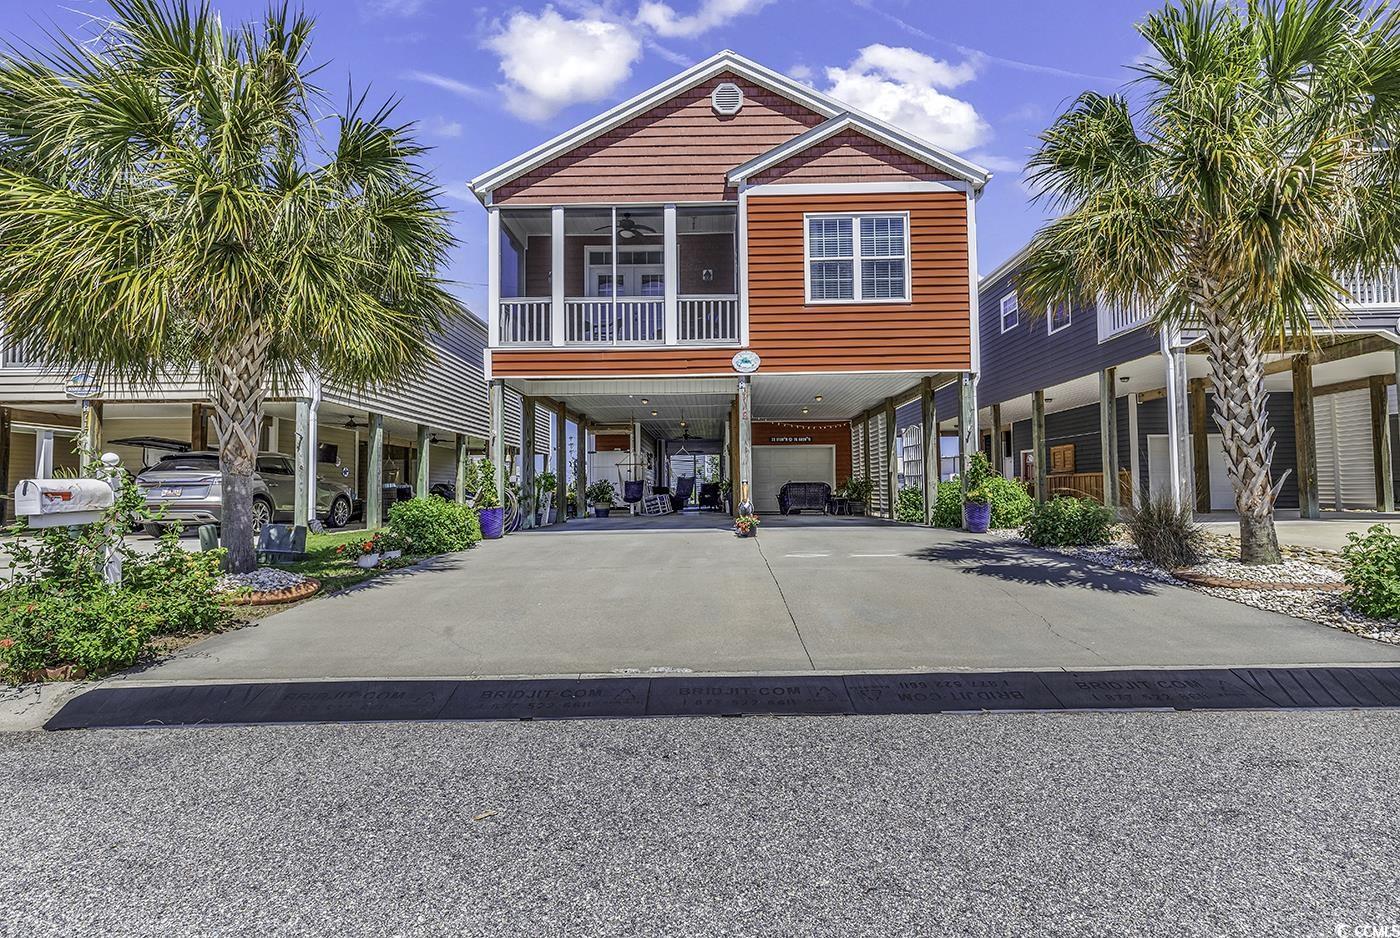 welcome to the epitome of luxury living at 719 ashland ave, north myrtle beach sc. a haven for the discerning buyer, this home offers a seamless blend of comfort, style, and sophistication. not to mention, its less than 5 minutes to the ocean! upon entering, you'll be drawn to the open living spaces, accentuated by the cathedral ceiling in the family room/dining area, and the warm ambiance of luxury vinyl plank floors. the large, gourmet kitchen is a chef's dream with its abundance of cabinets, smooth top stove, stainless steel appliances, and exquisite granite countertops. further updates include designer glass tile backsplashes and under cabinet lighting! this 3-bedroom, 3 and a half-bathroom property is thoughtfully designed for both relaxation and entertainment. each of the three bedrooms has its own private bath and the heated and cooled garage features a half bath! enjoy a tranquil afternoon on the roomy front porch, or entertain guests in the under-house area completed with a diamond bright custom floor coating. this area is perfect for enjoying breezes from the nearby ocean! a standout feature is your own elevator, making moving between floors or carrying groceries a breeze. the oversized garage offers ample storage and could easily transform into a workshop, plus it features a half bath and new heating and cooling unit!   one of the largest expenses for a homeowner is the roof, no worries here! this amazing home has a premium quality metal roof, to enhance the durability, you have a second membrane under the metal…. just think…. it’s like having two roofs on your beach home!   the second most costly expenses for a homeowner is the heating and cooling unit for the home! no worries here, a premium unit was just installed!  you're just minutes away from the ocean drive section of north myrtle beach, accessible by golf cart, and within close proximity to the north myrtle beach aquatic & fitness center. this home is more than a place to live, rent or make a second home… it's a lifestyle. your luxury beach style retreat awaits!